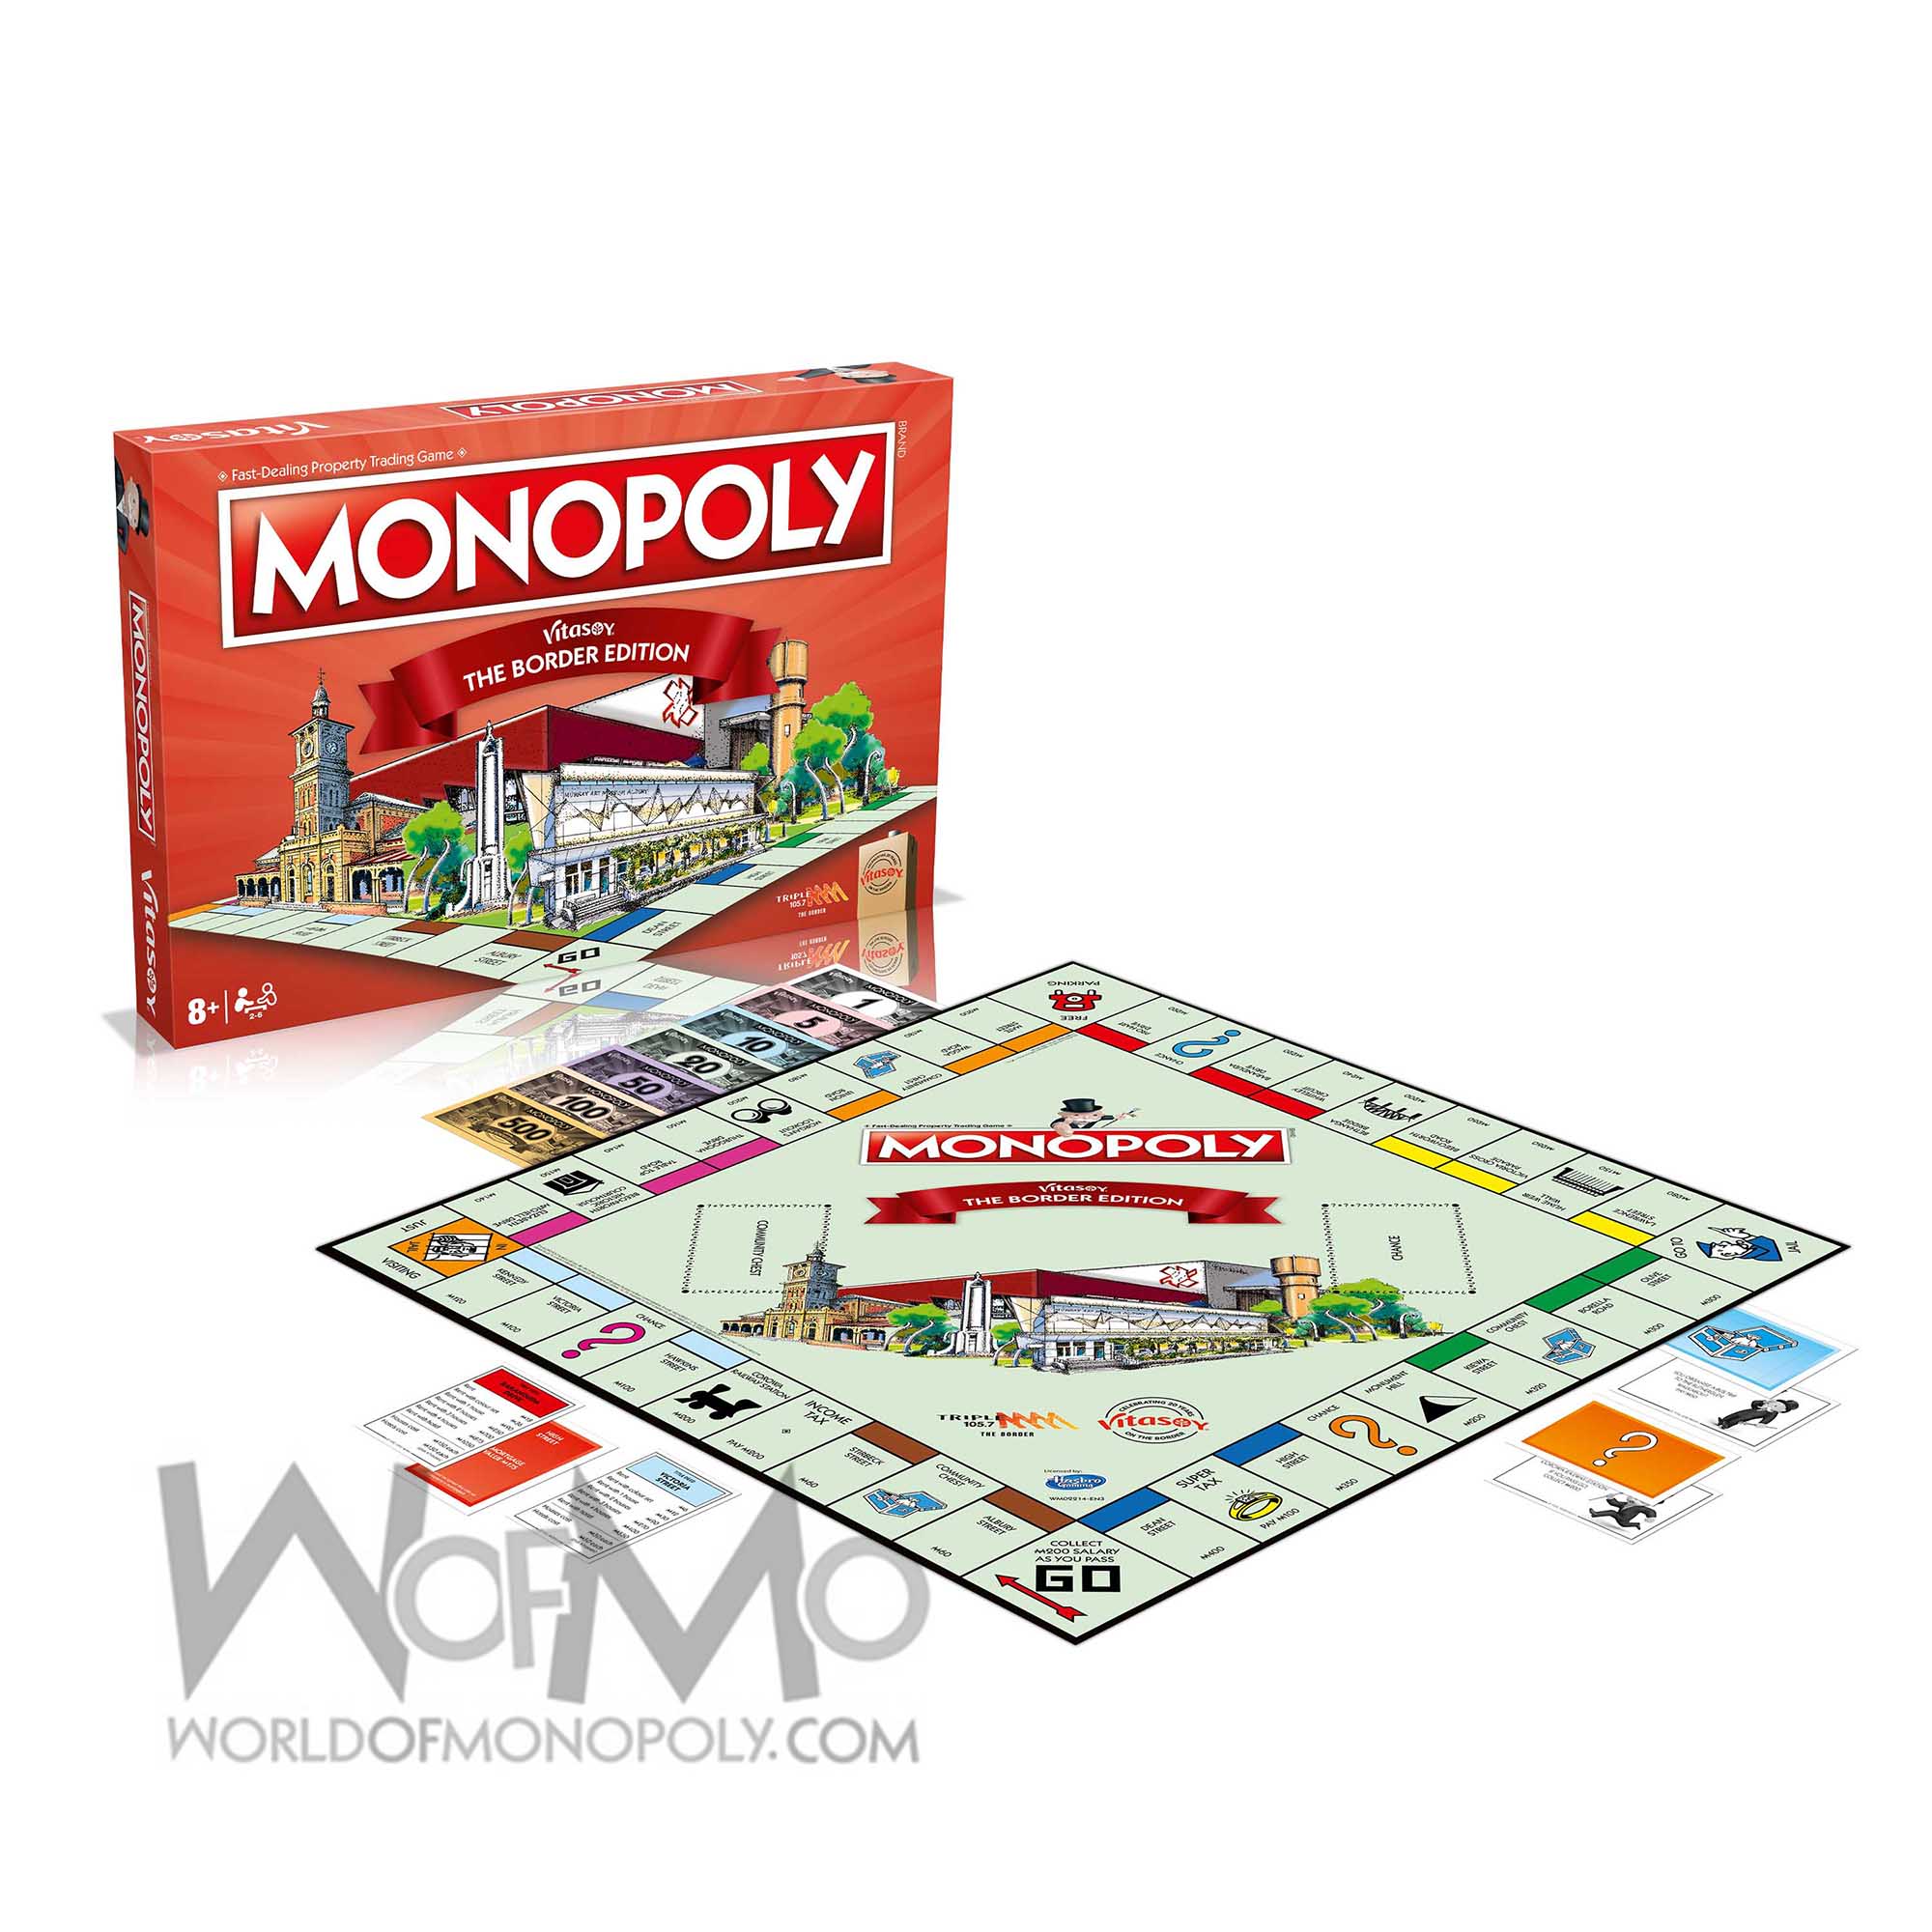 Monopoly: Roblox 2021 Edition Game for Kids 8 and Up - Monopoly